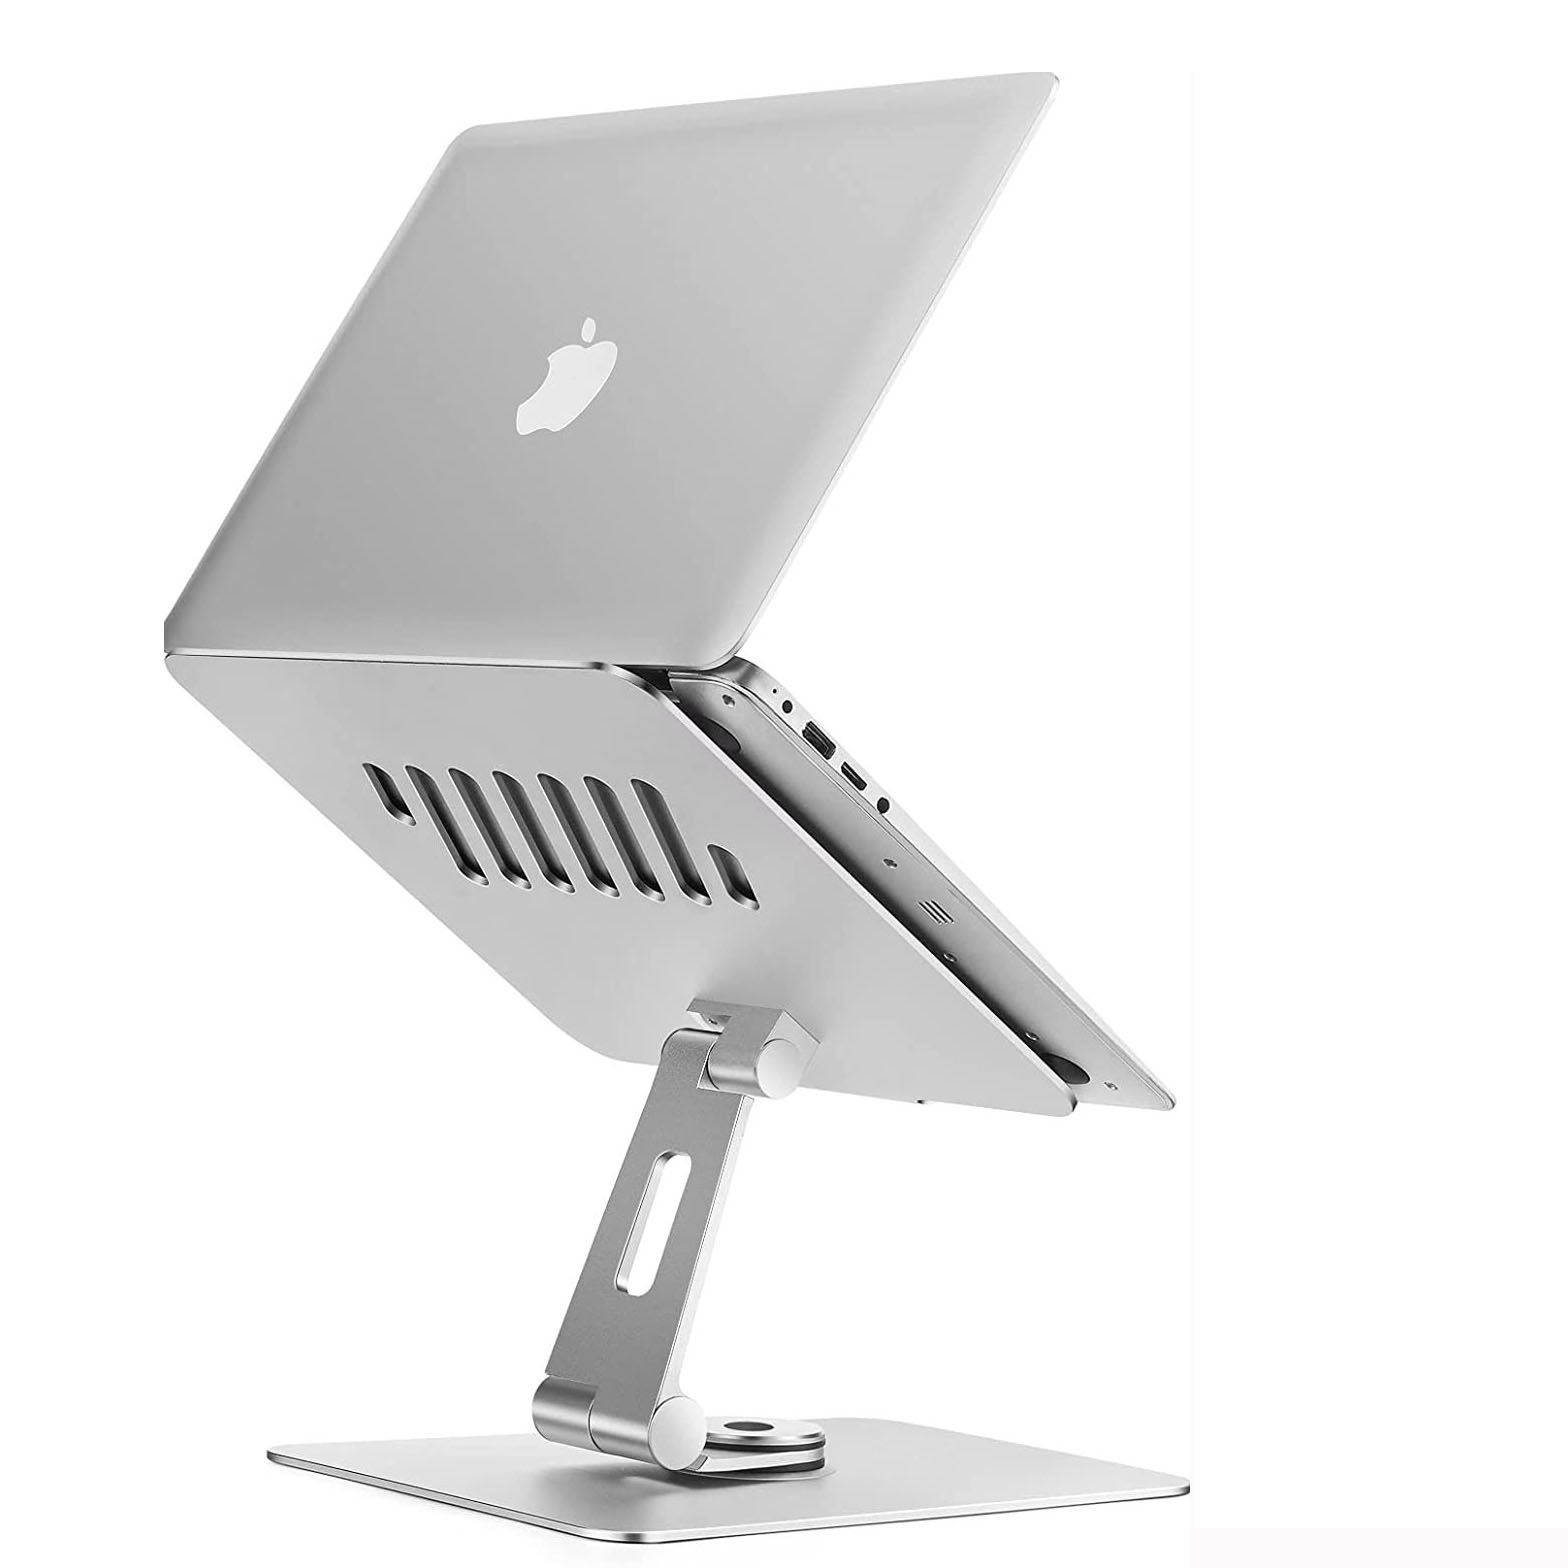 N71 laptop stand